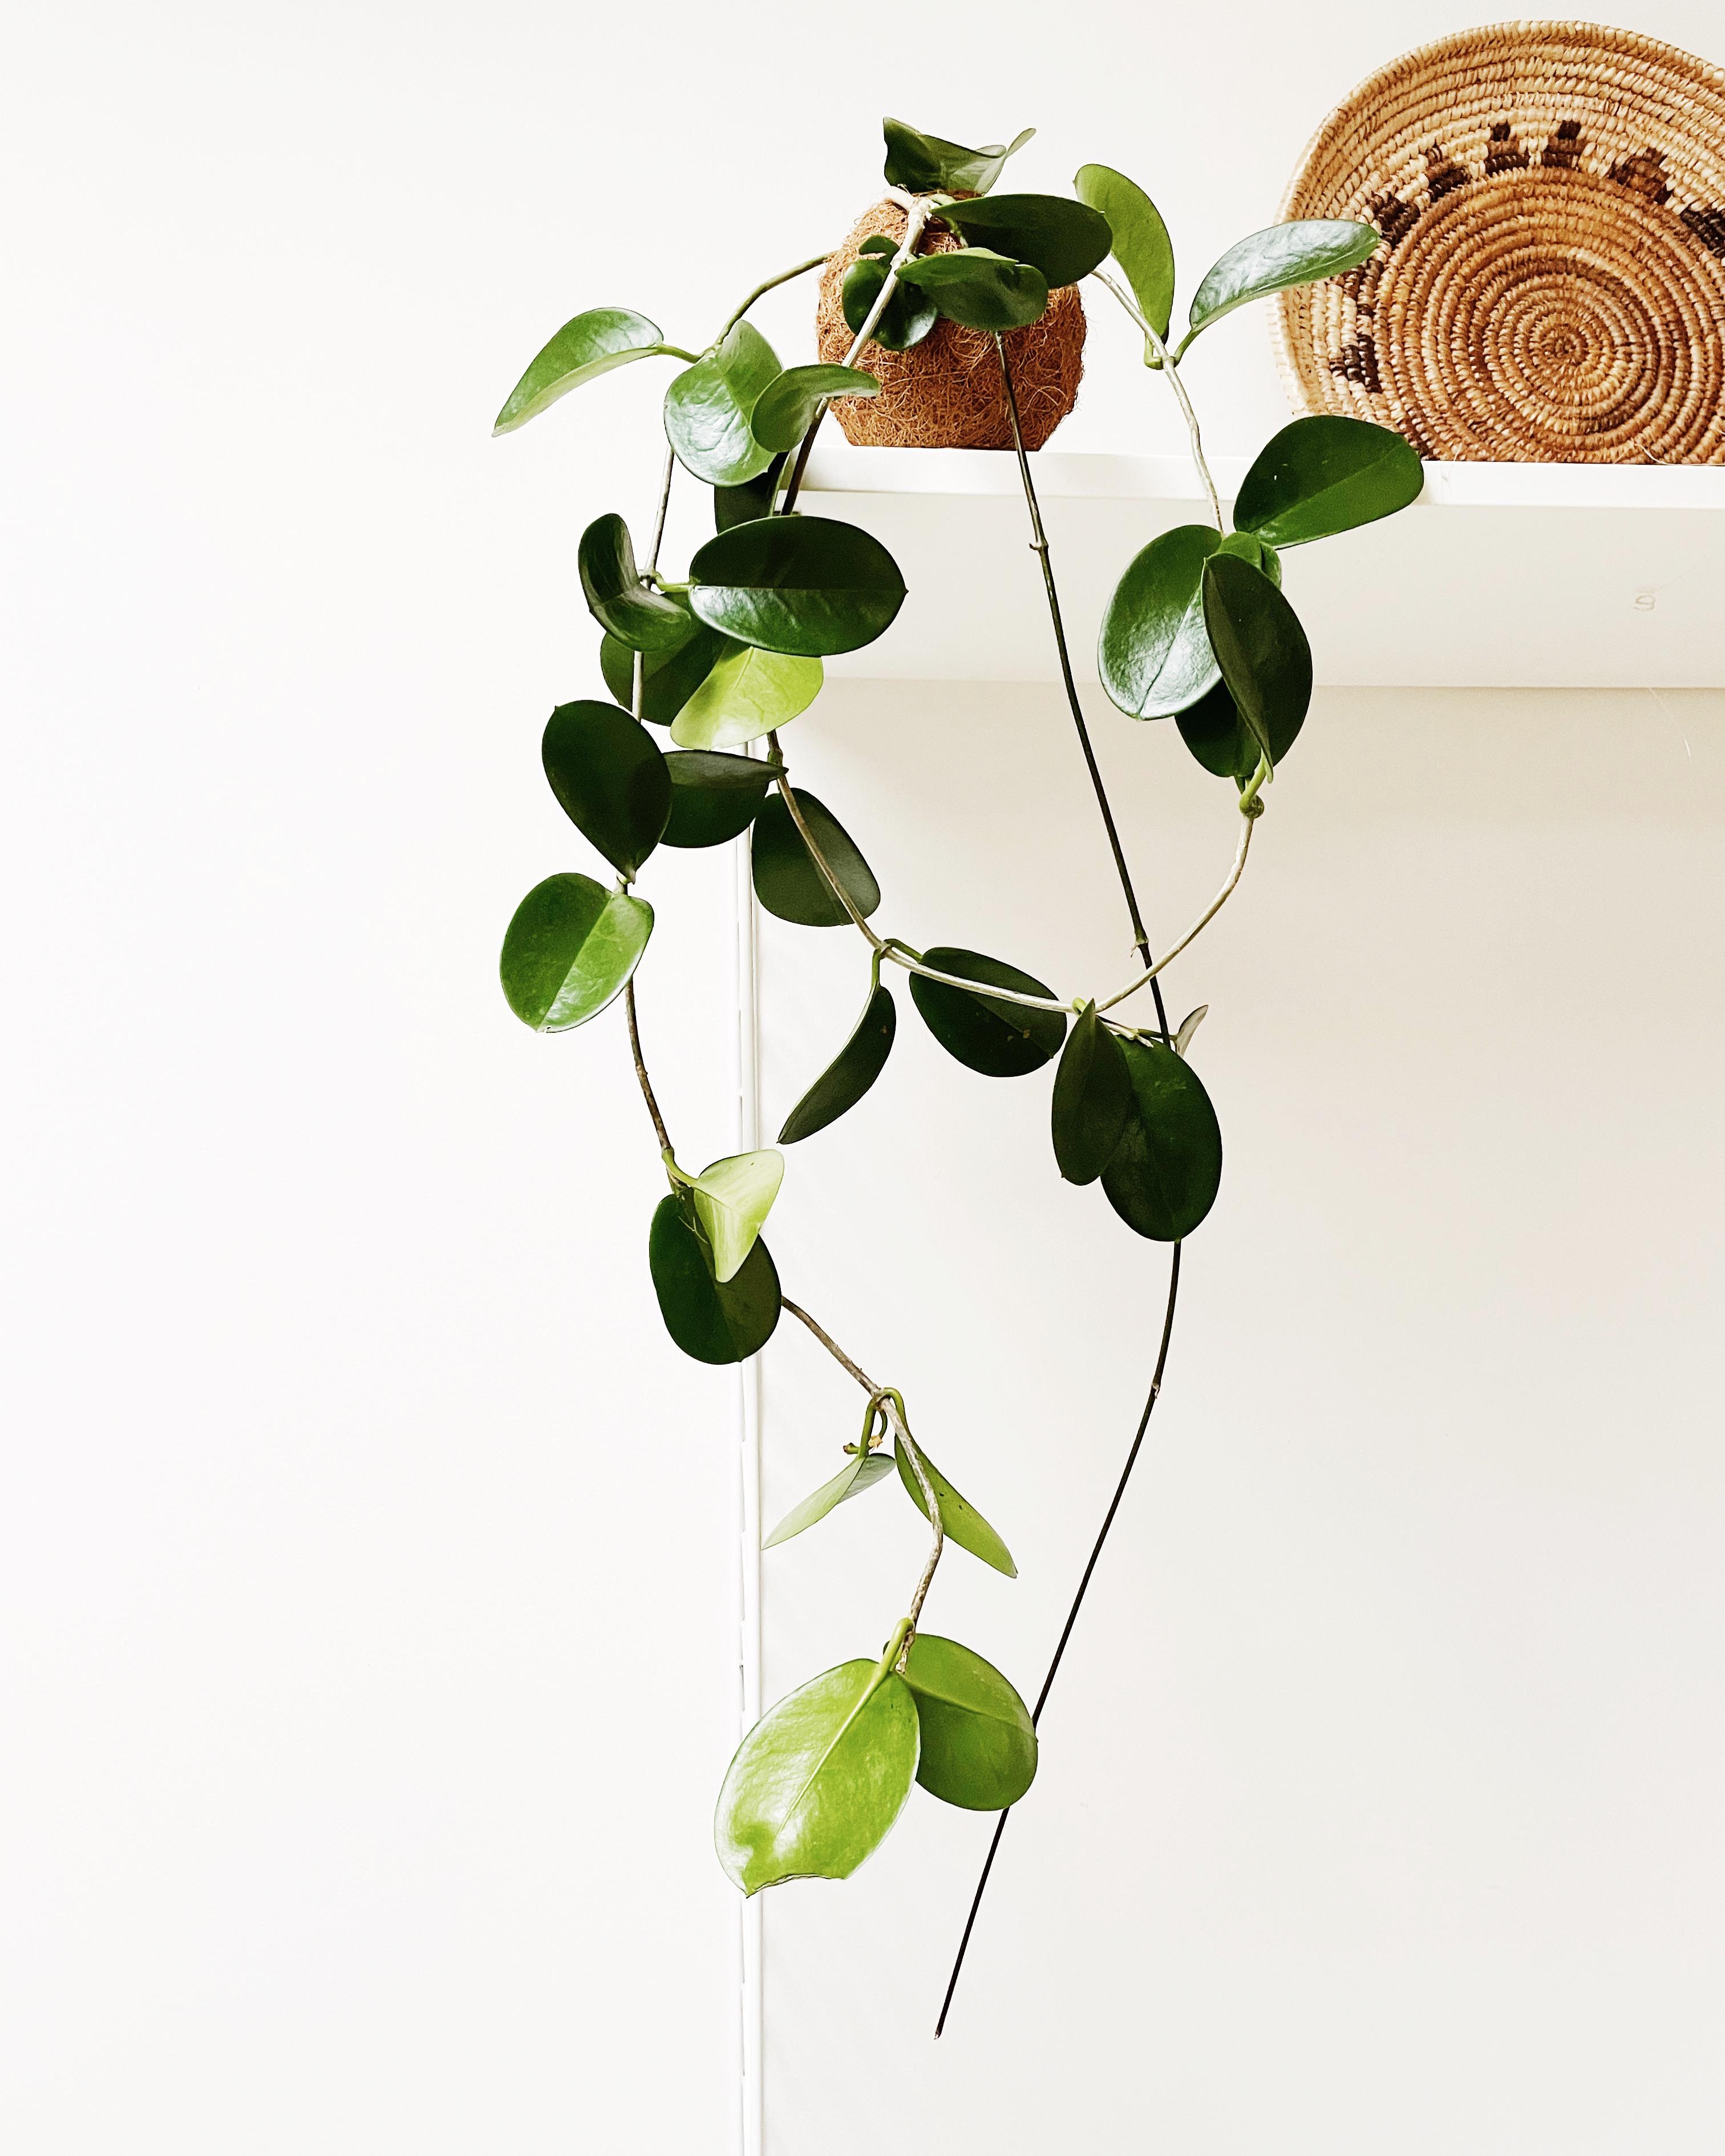 Put your plants up in the air
#scandi
#hyggehome #hygge #pflanzen
#zimmerpflanze #plants #interior 
#regal